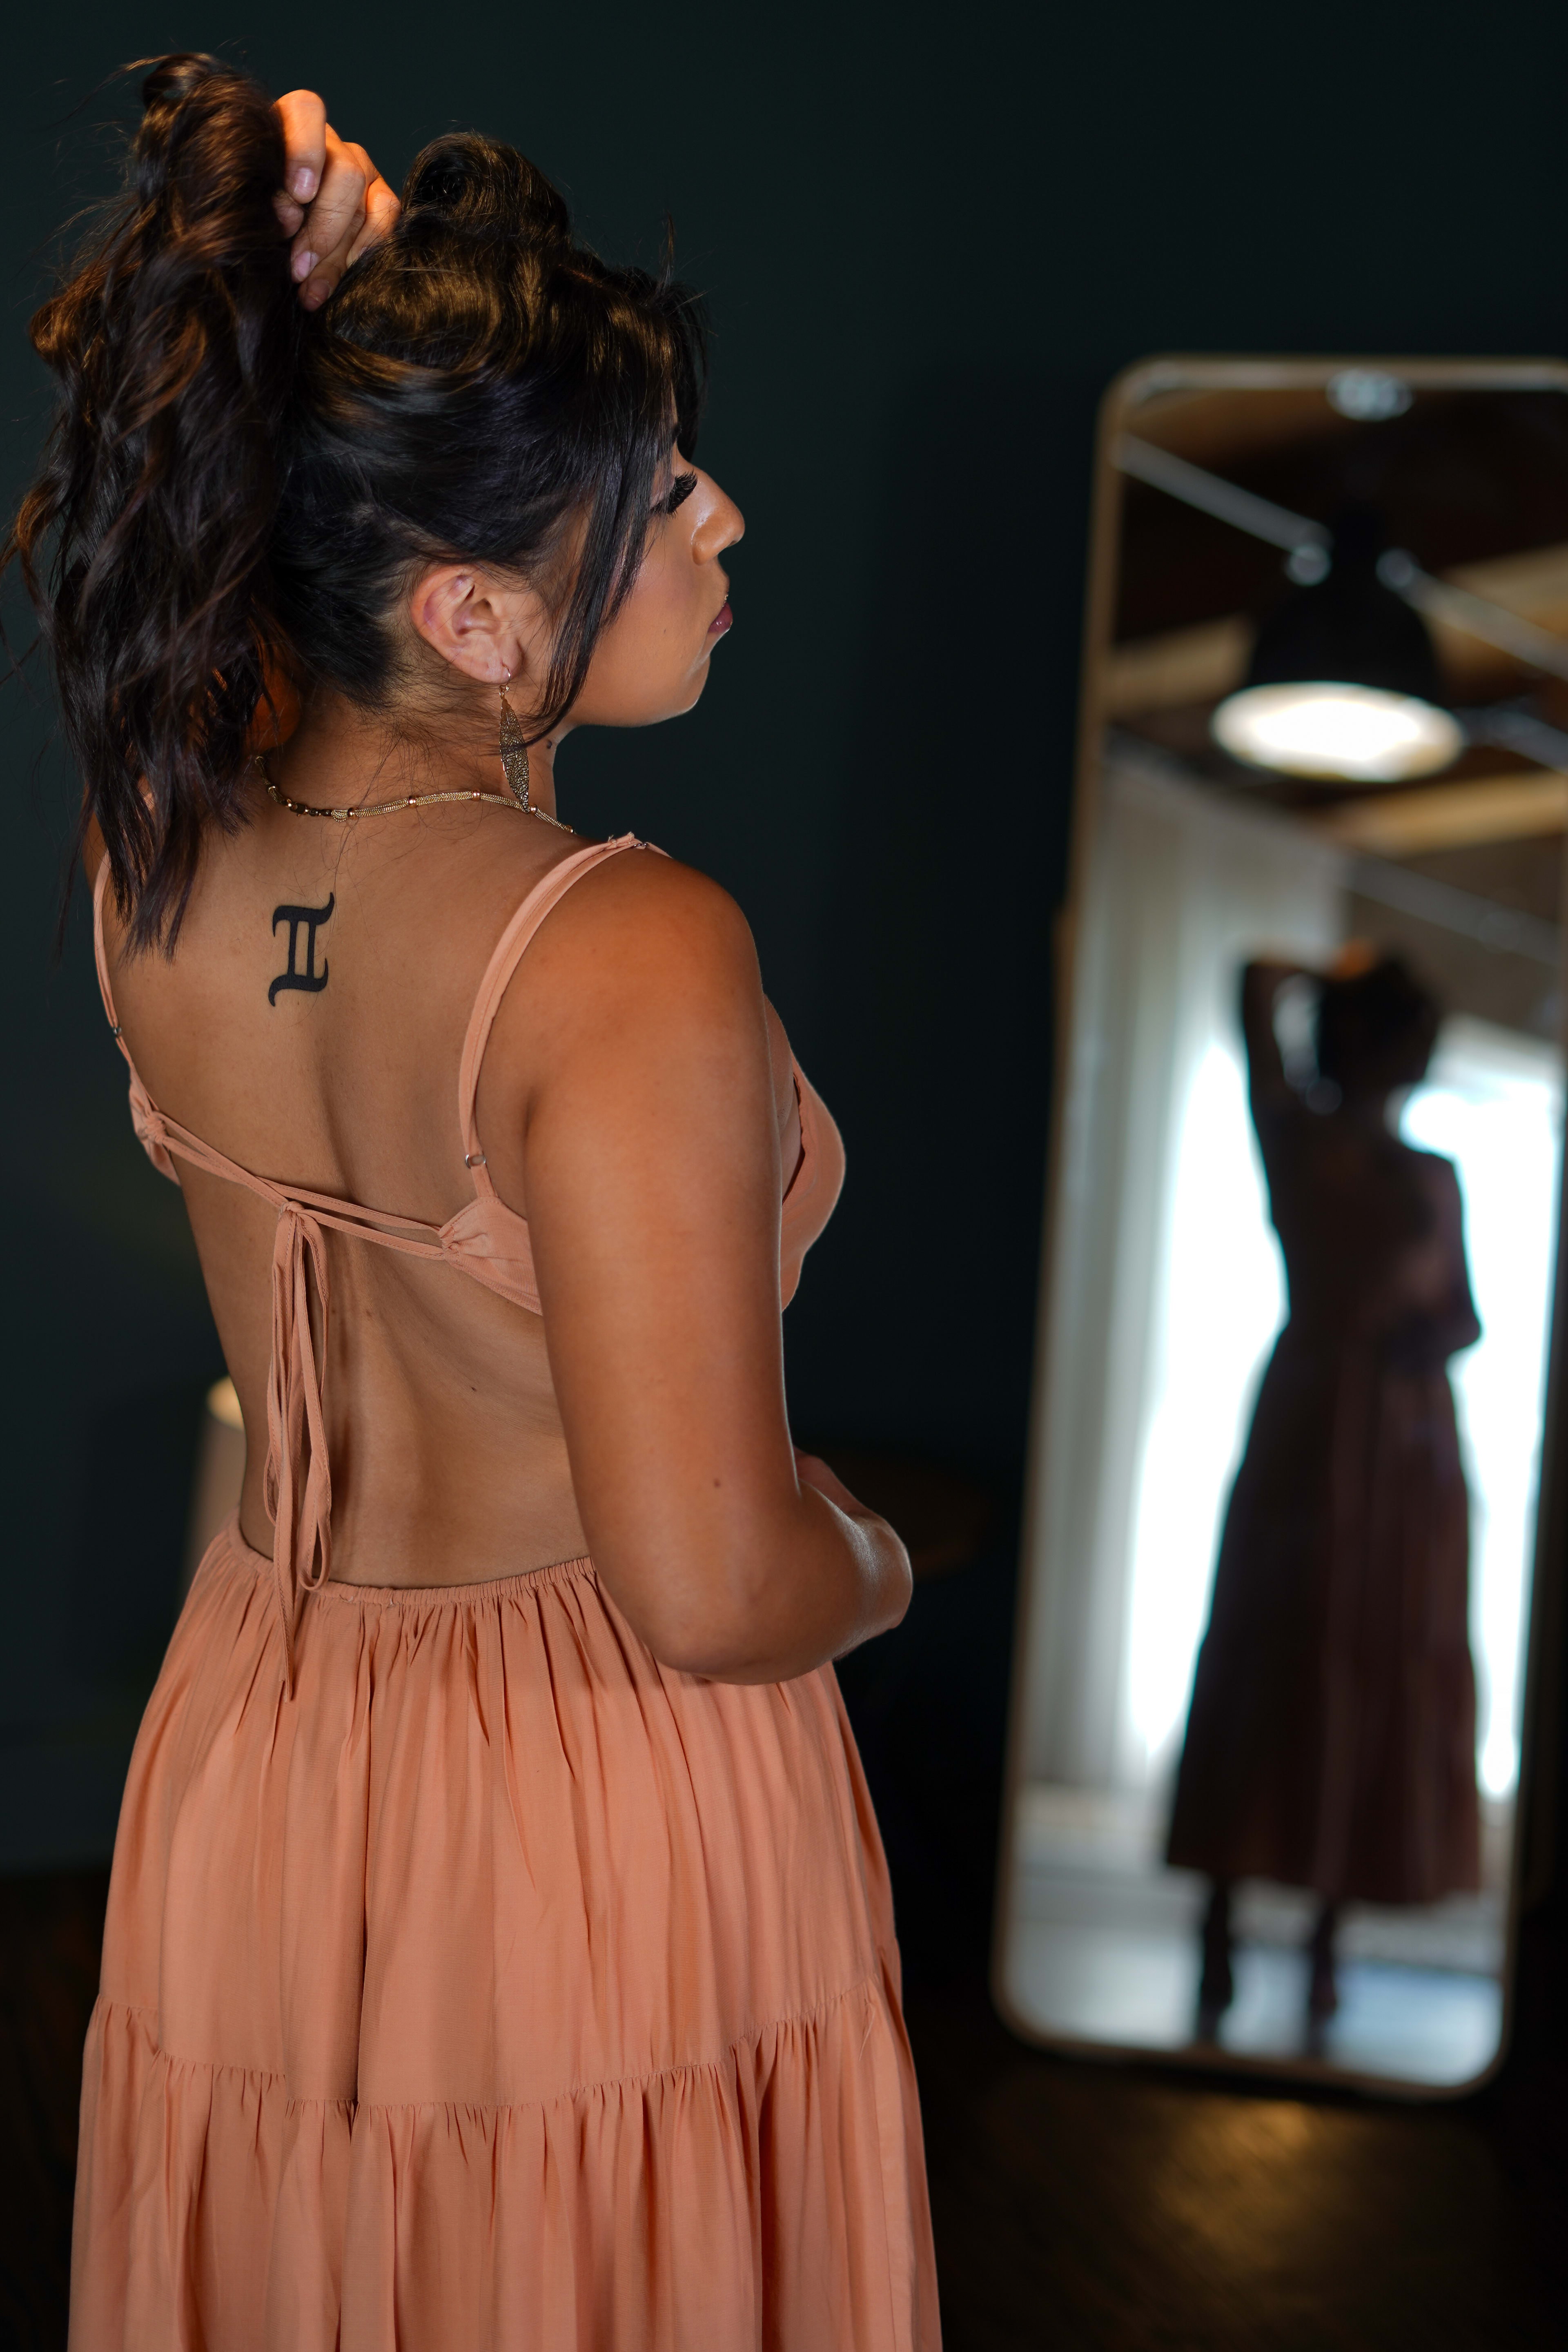 A woman with a tattoo on her back in an orange dress for a fashion photoshoot.